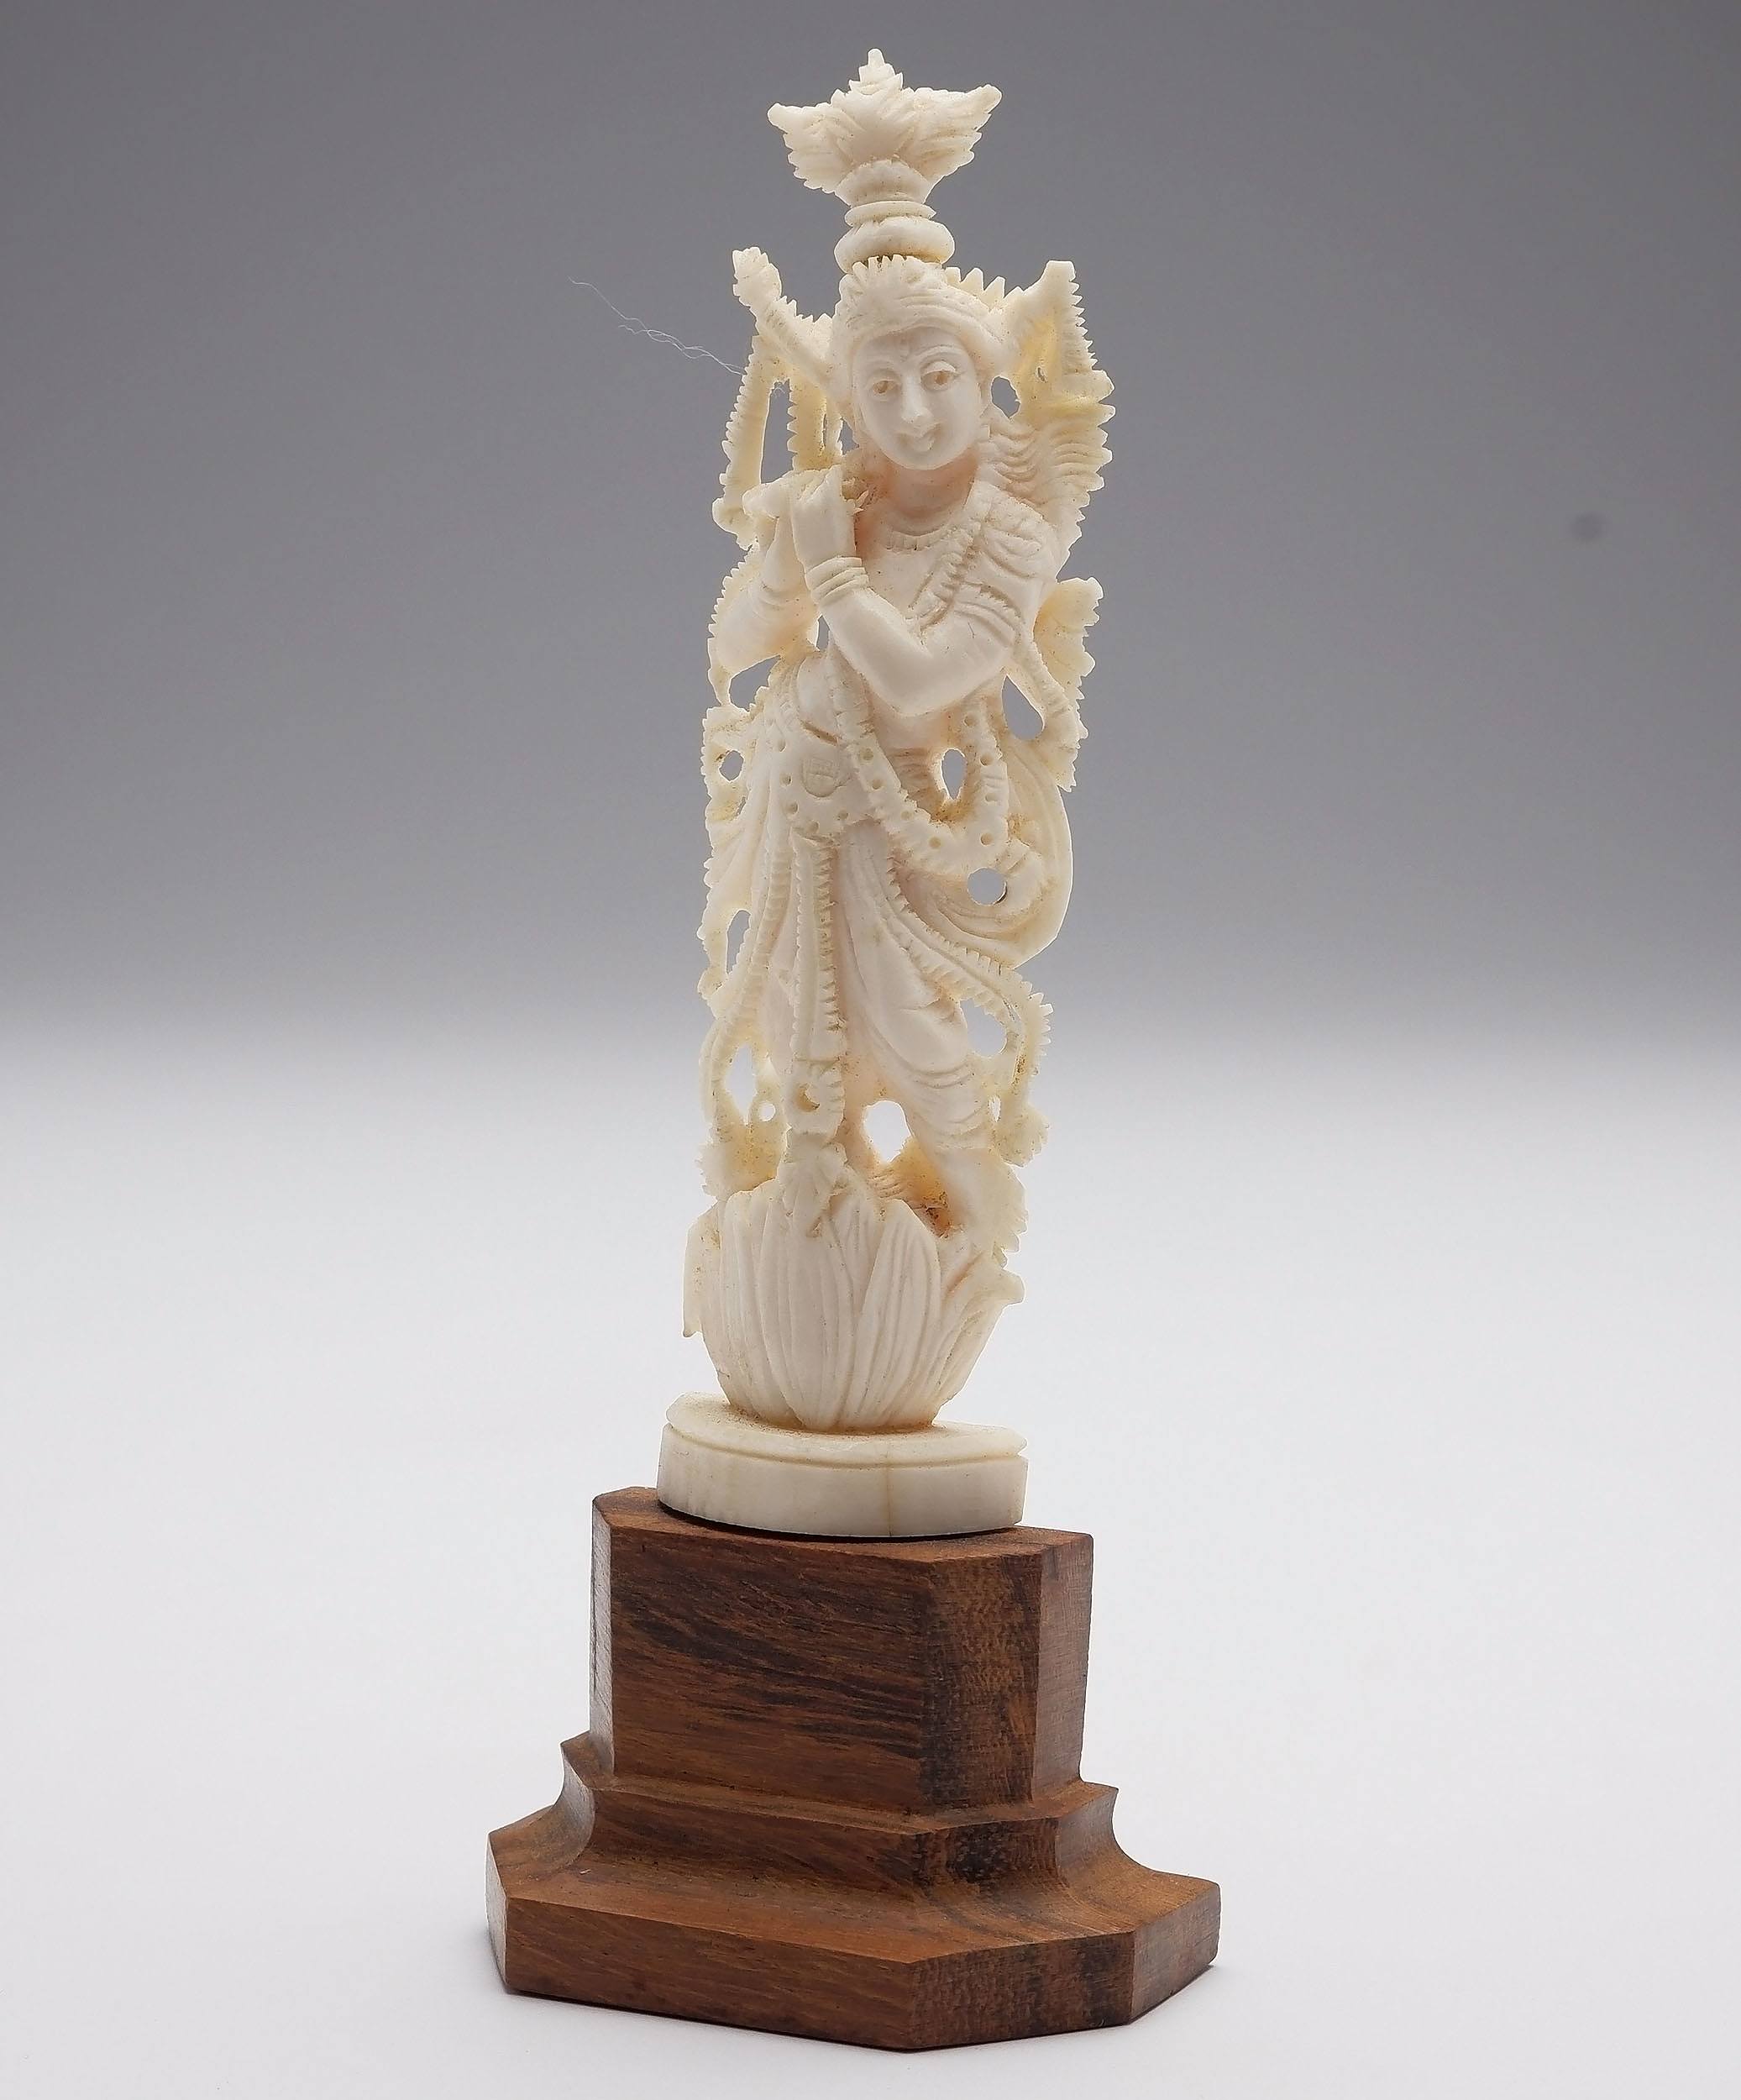 'Indian Carved Ivory Hindu Deity, Early to Mid 20th Century'